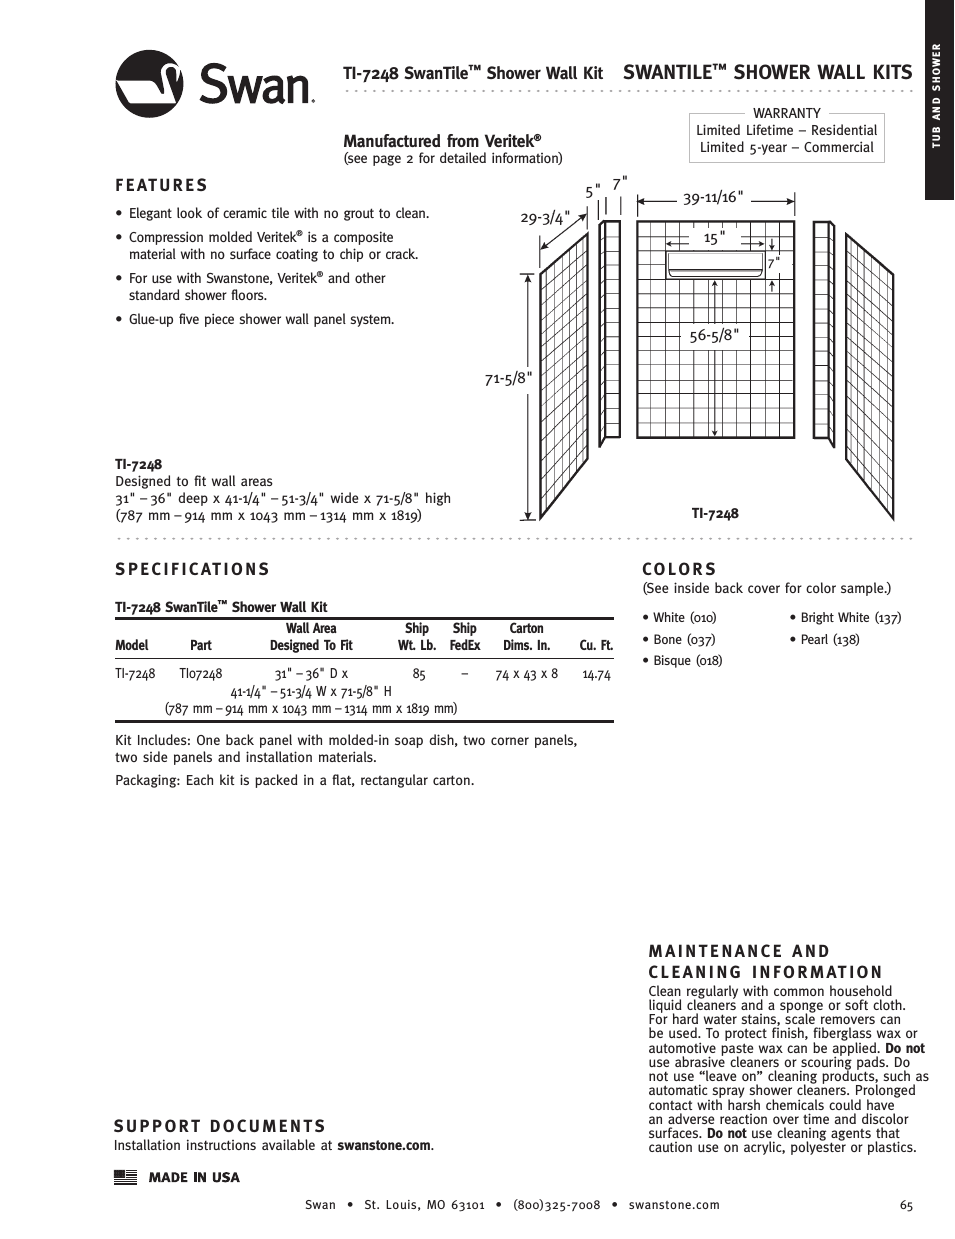 TI-7248 - Specification